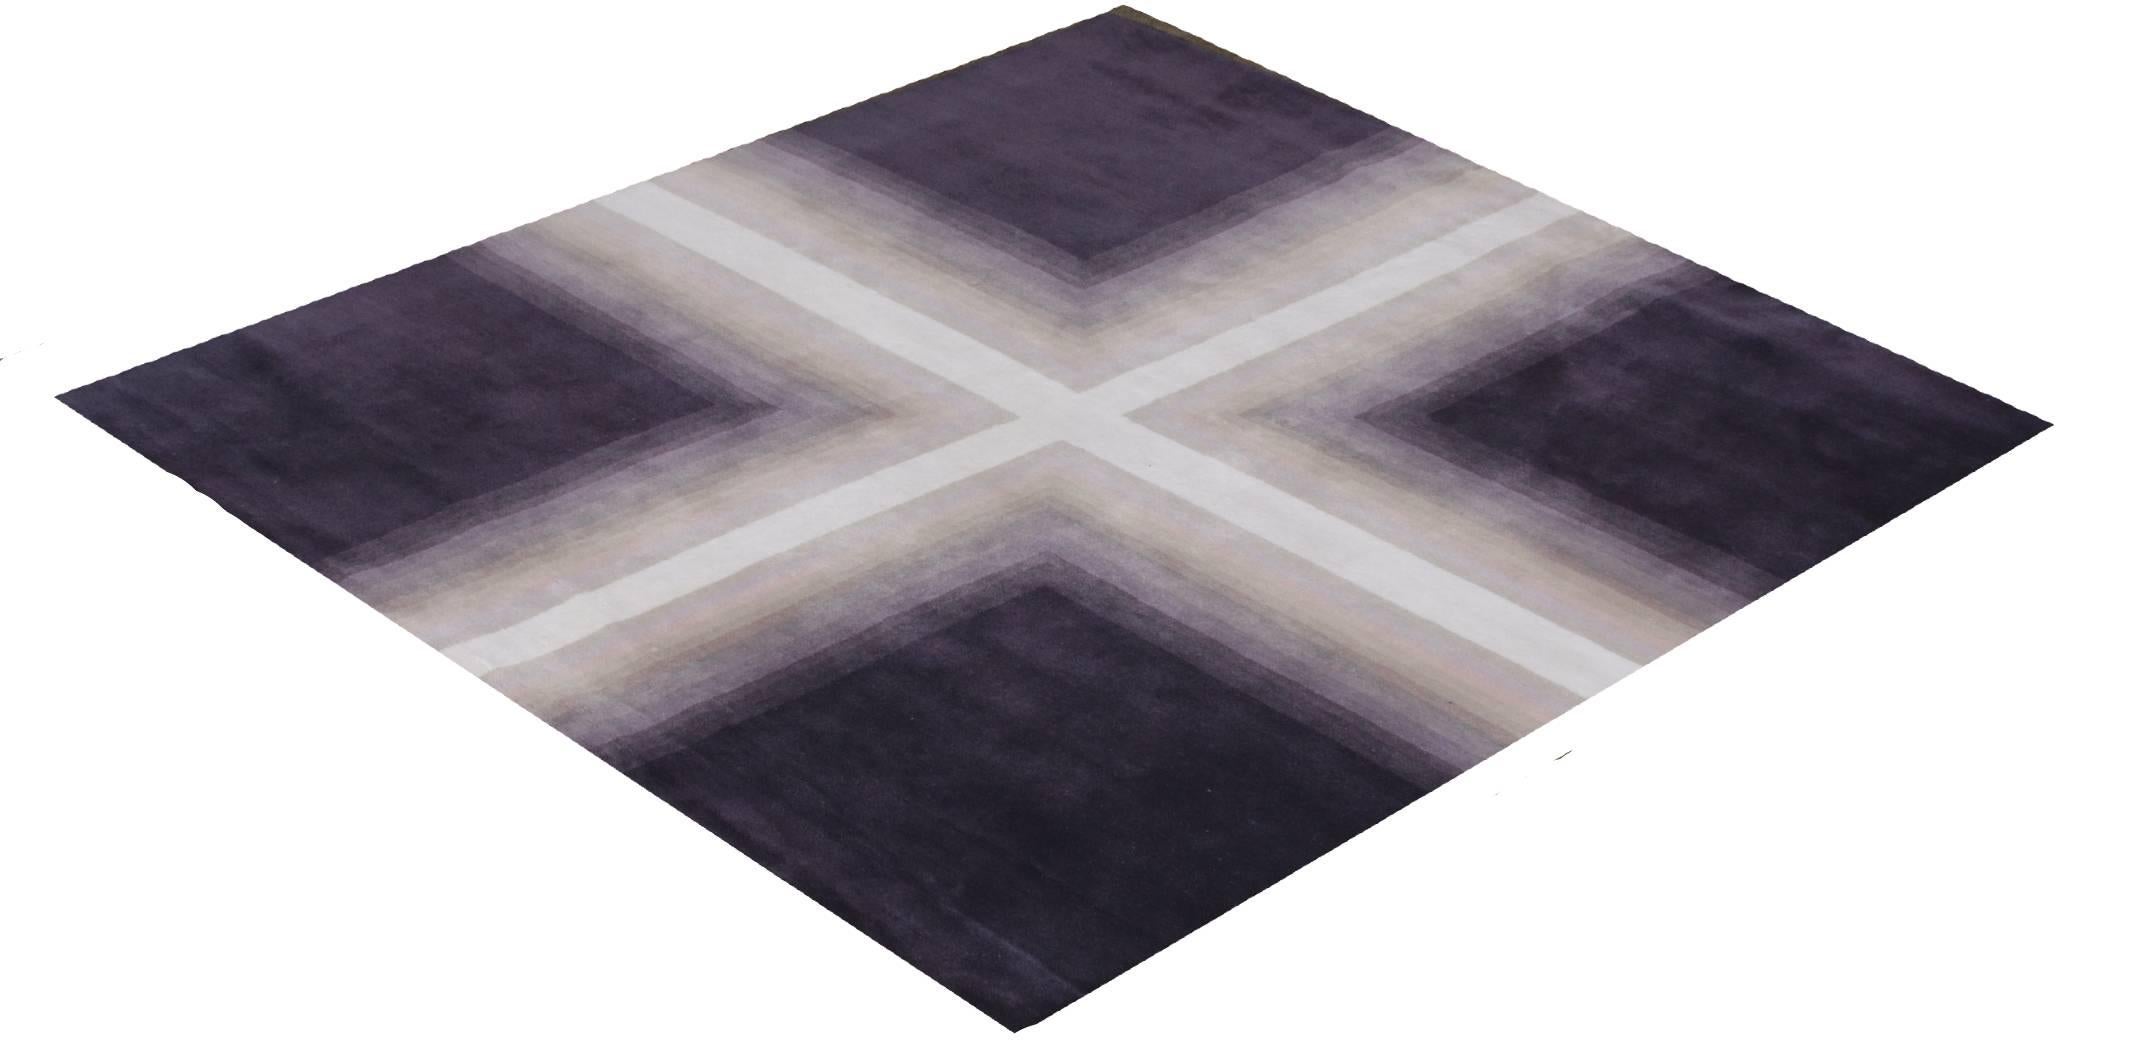 Gorgeous Geometric Purple Mid Century Modern Rug. Country of Origin: India/ Circa Date: Modern - Size: 6 ft x 6 ft 1 in (1.82 m x 1.85m)
  